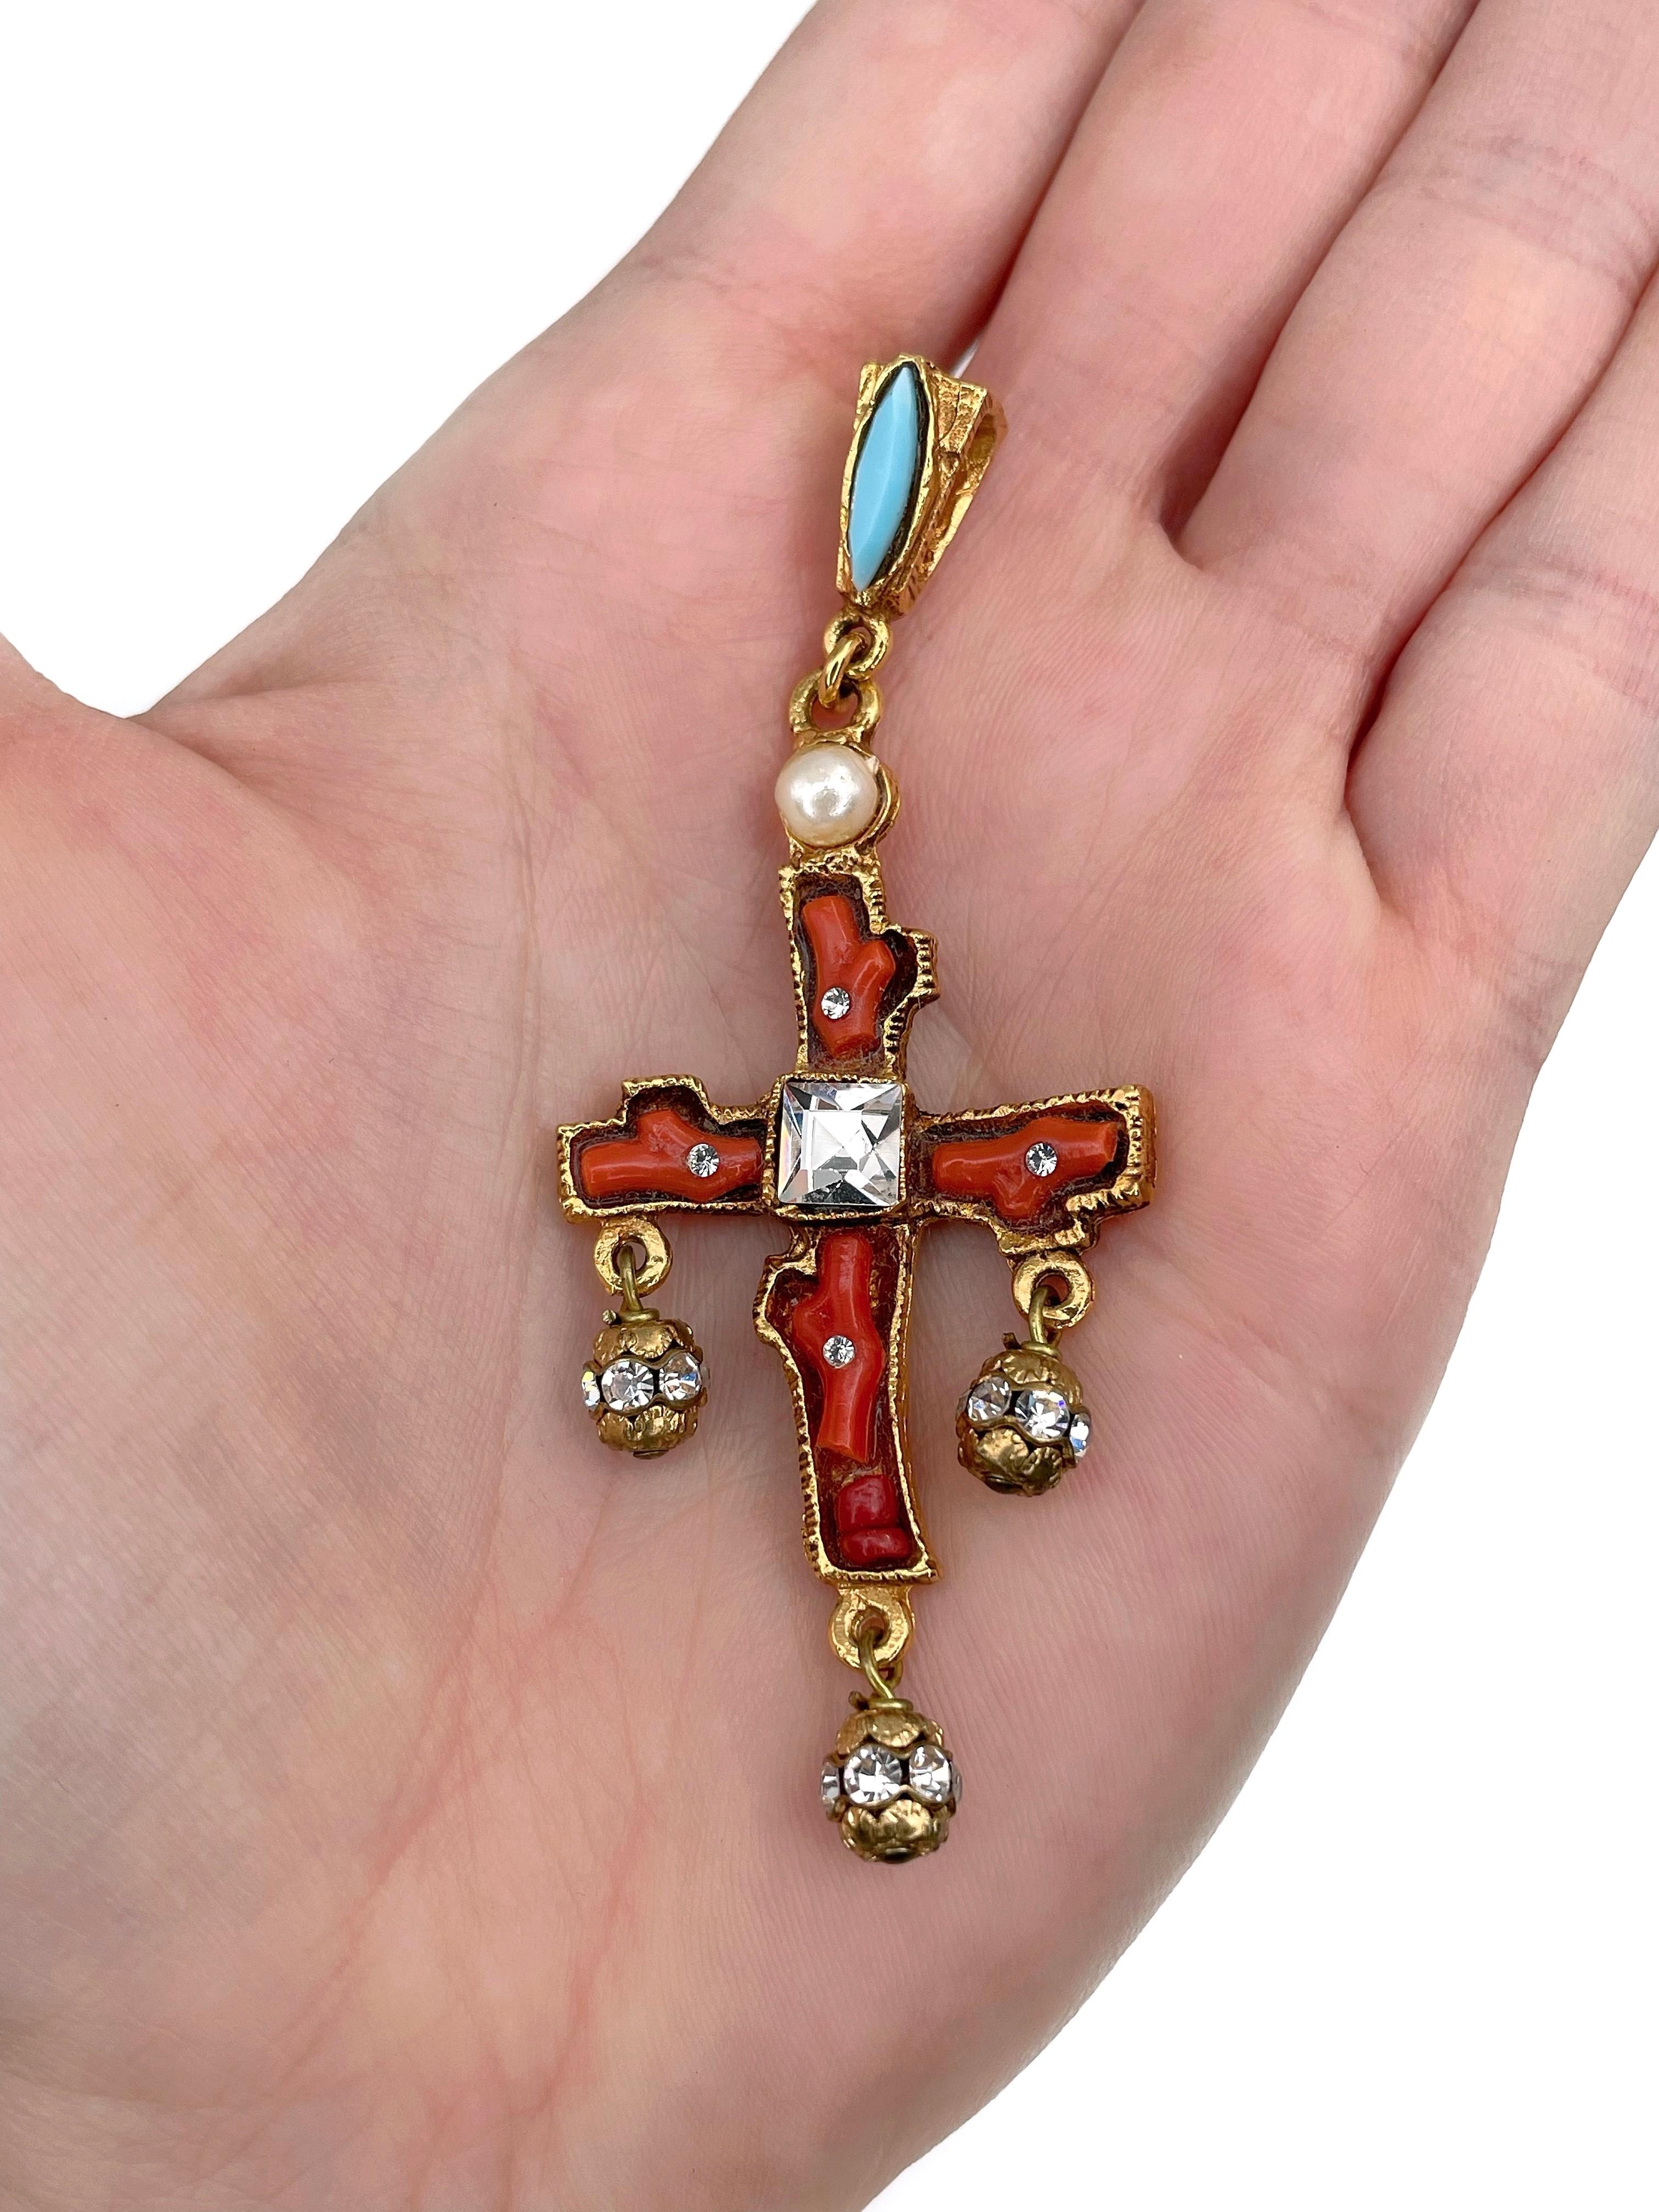 This is an amazing gold tone cross pendant designed by Christian Lacroix in 1990’s. The piece is crafted in base metal and is gold plated. It features clear crystals, faux corals, faux turquoise and faux pearl.

Signed: “Christian Lacroix - CL -